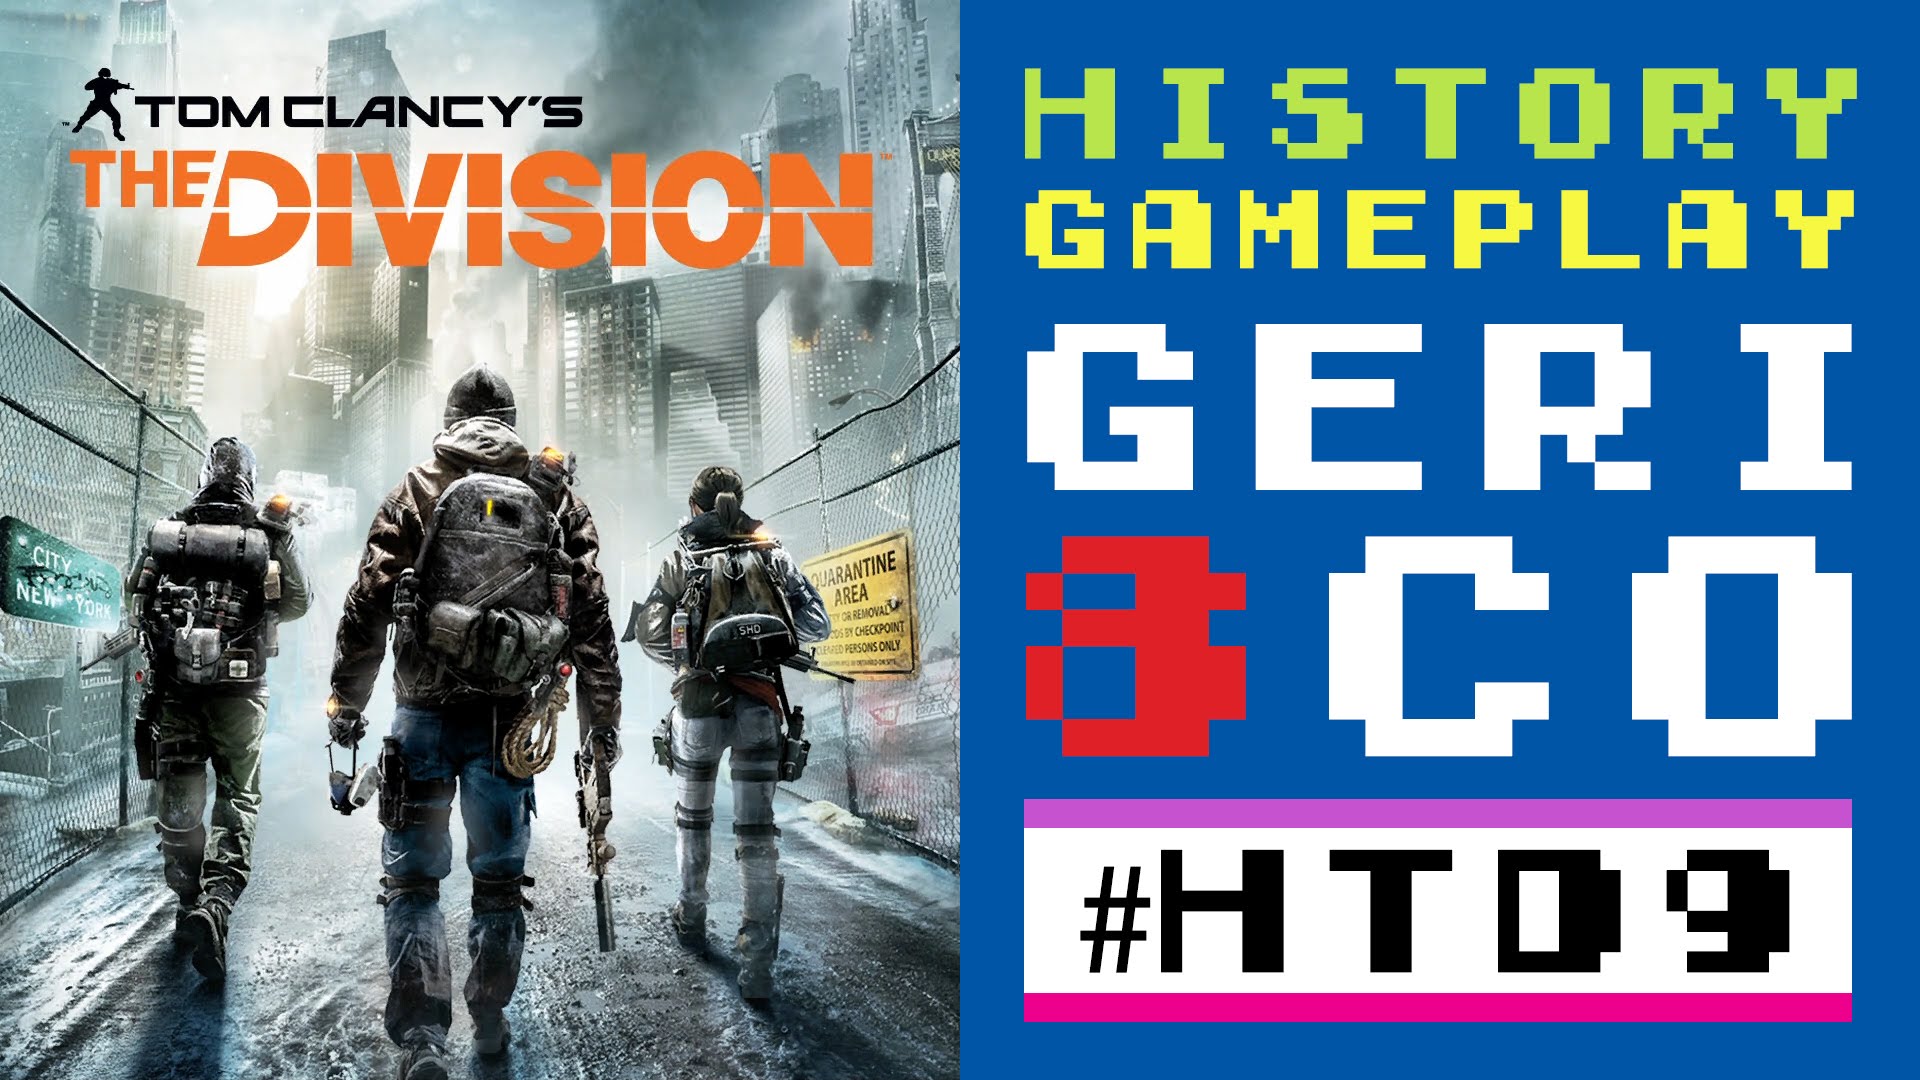 THE DIVISION 1A TEMPORADA (HISTORY GAMEPLAY) #HTD9 de PlaVipCat